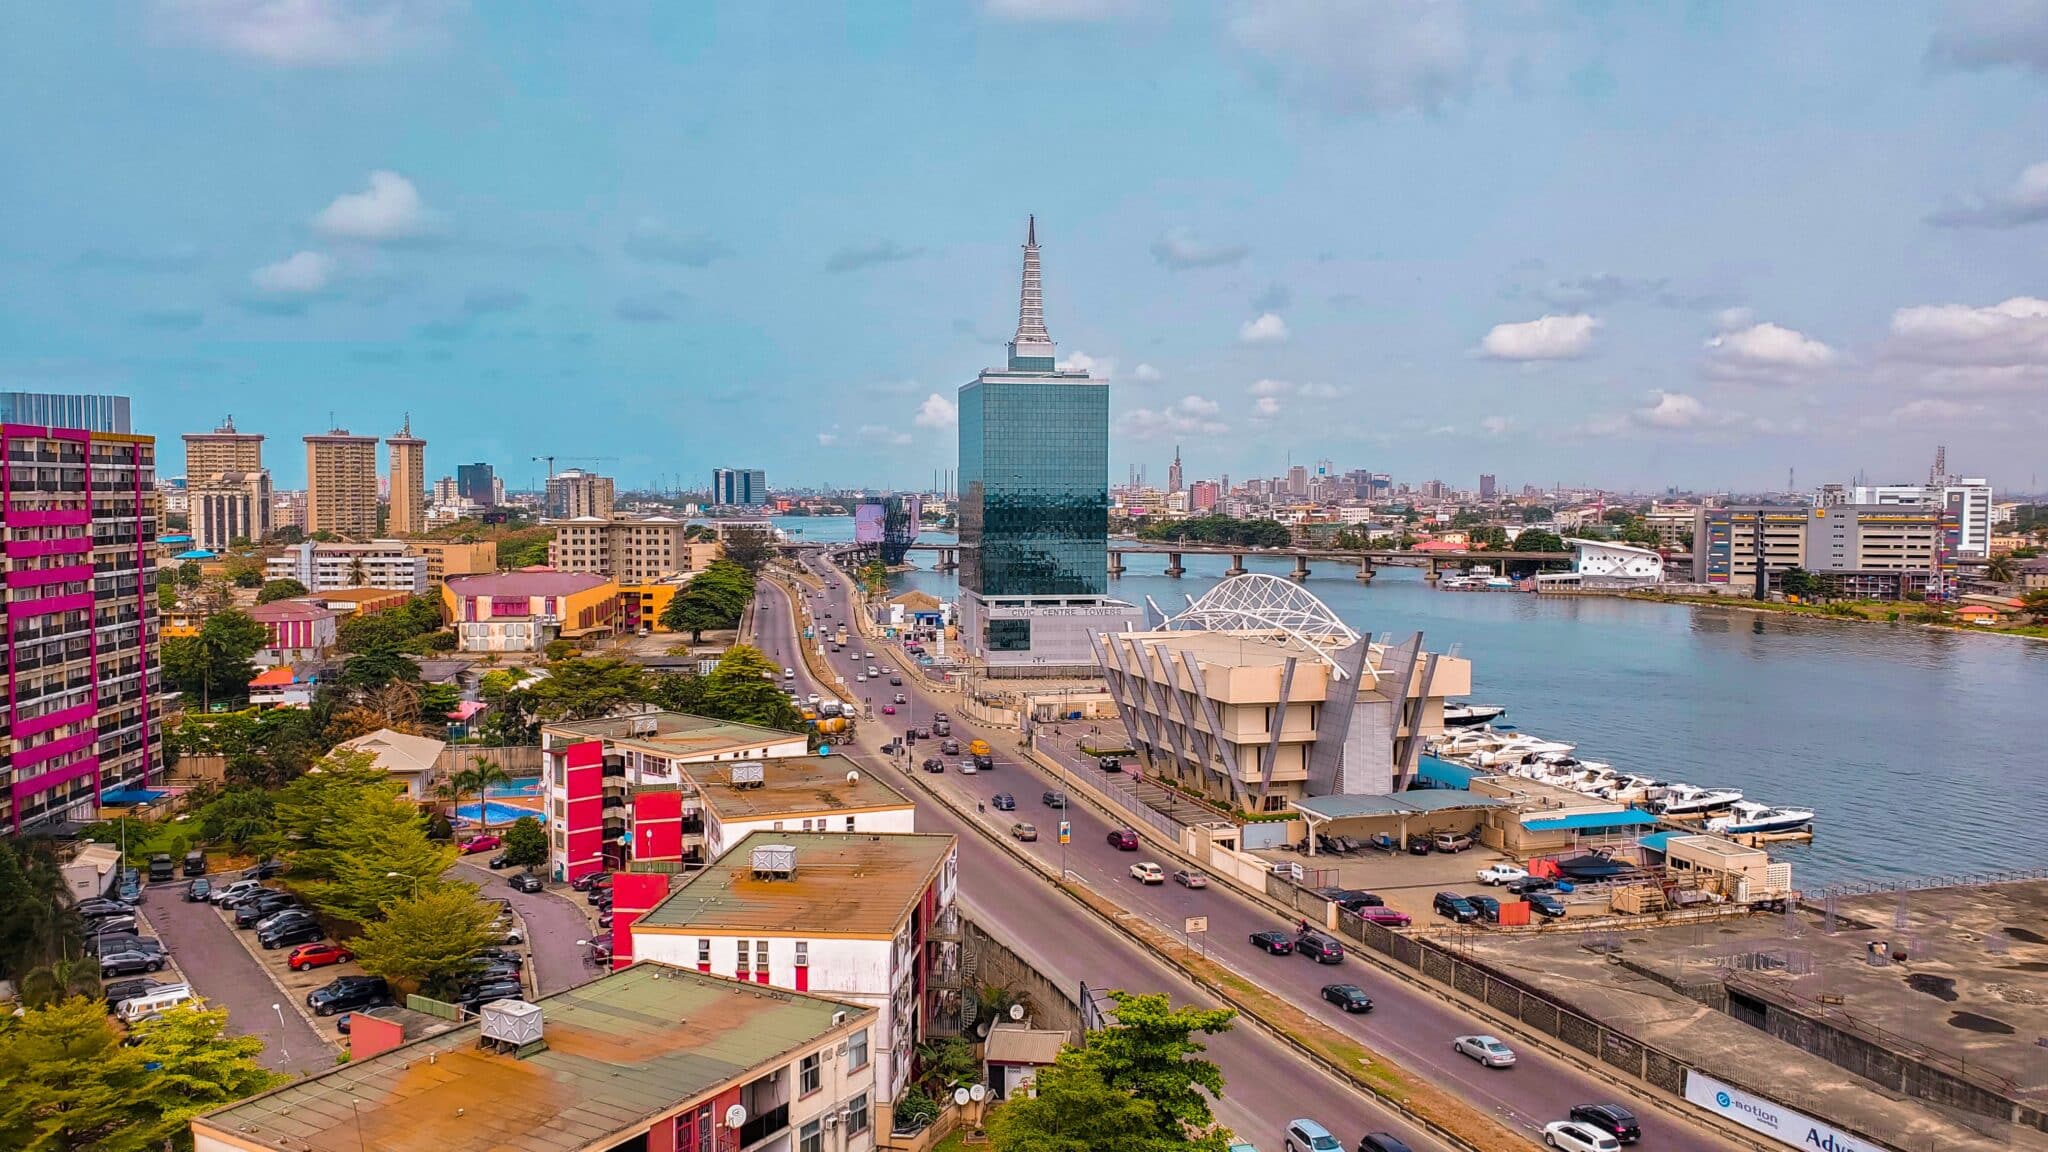 Nigerian currency: view of a city in Nigeria